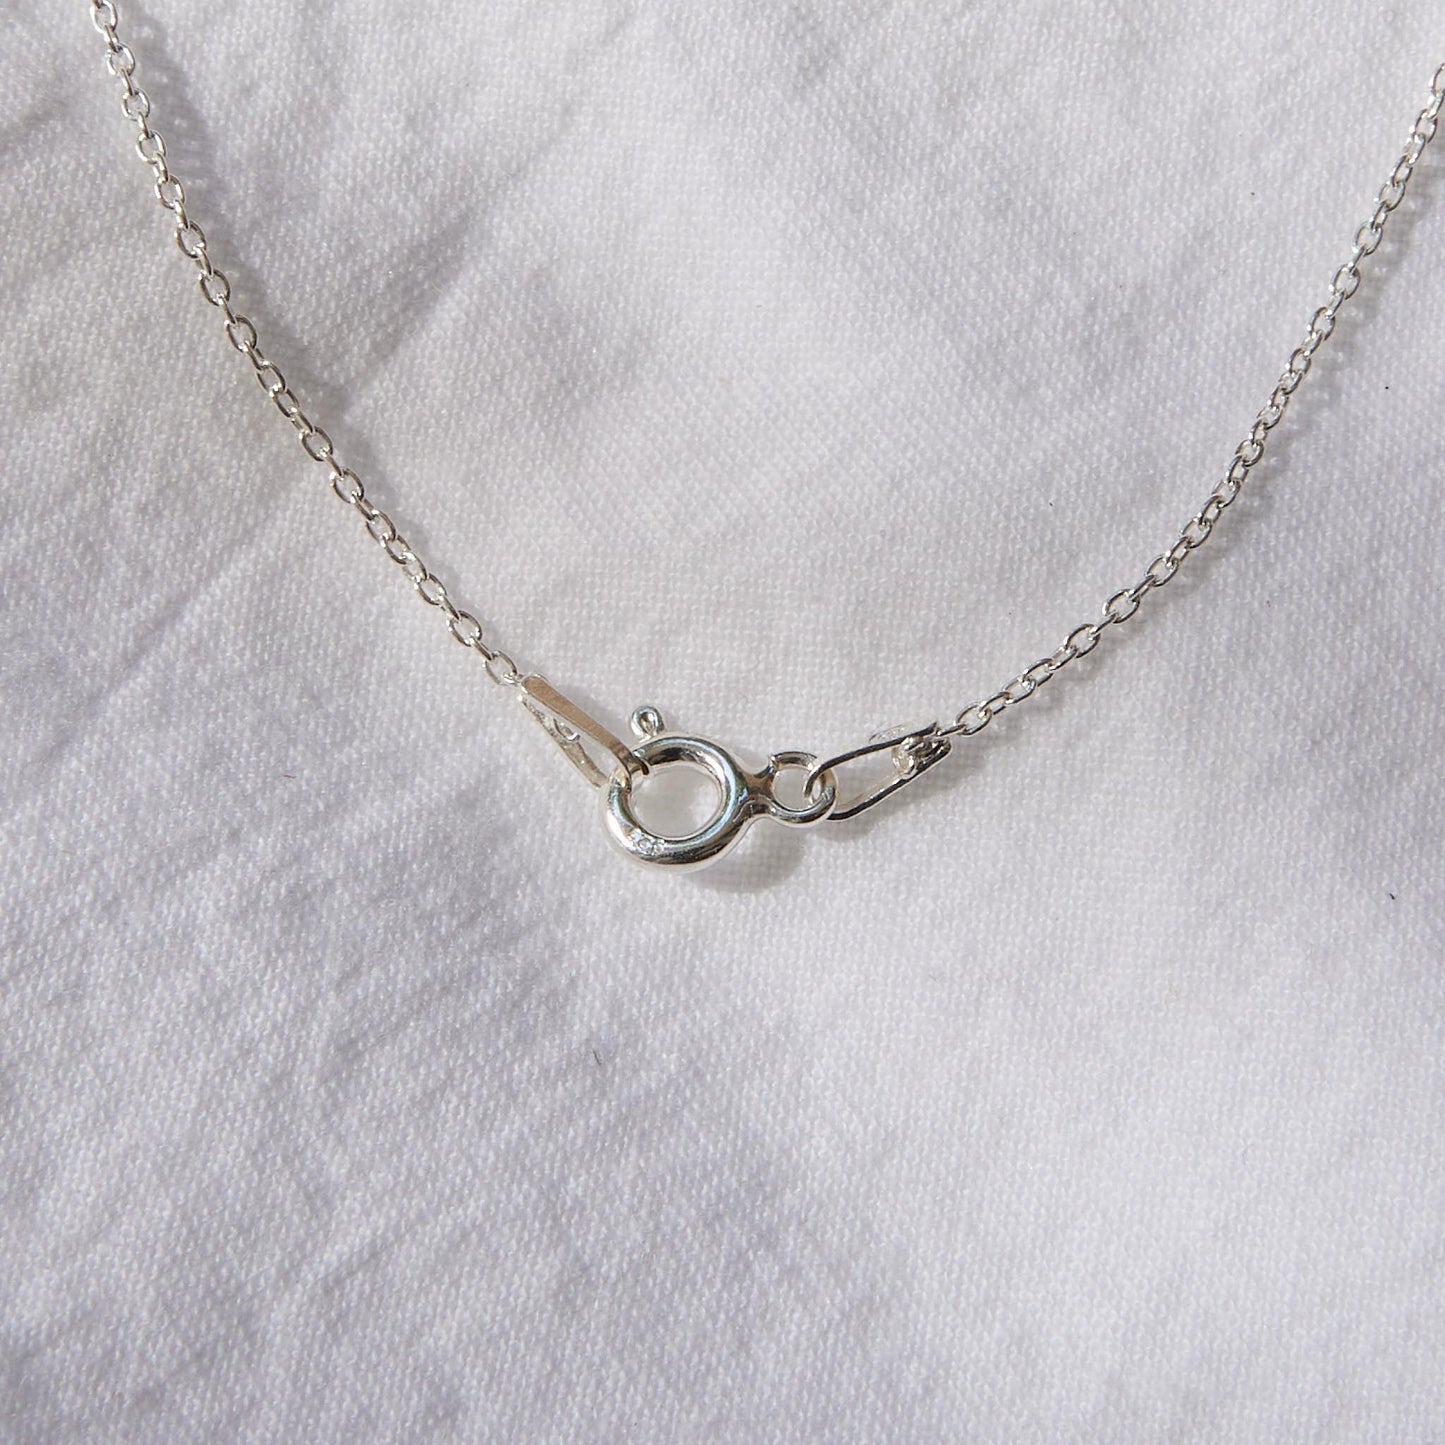 Compass and Pearl Necklace sterling silver